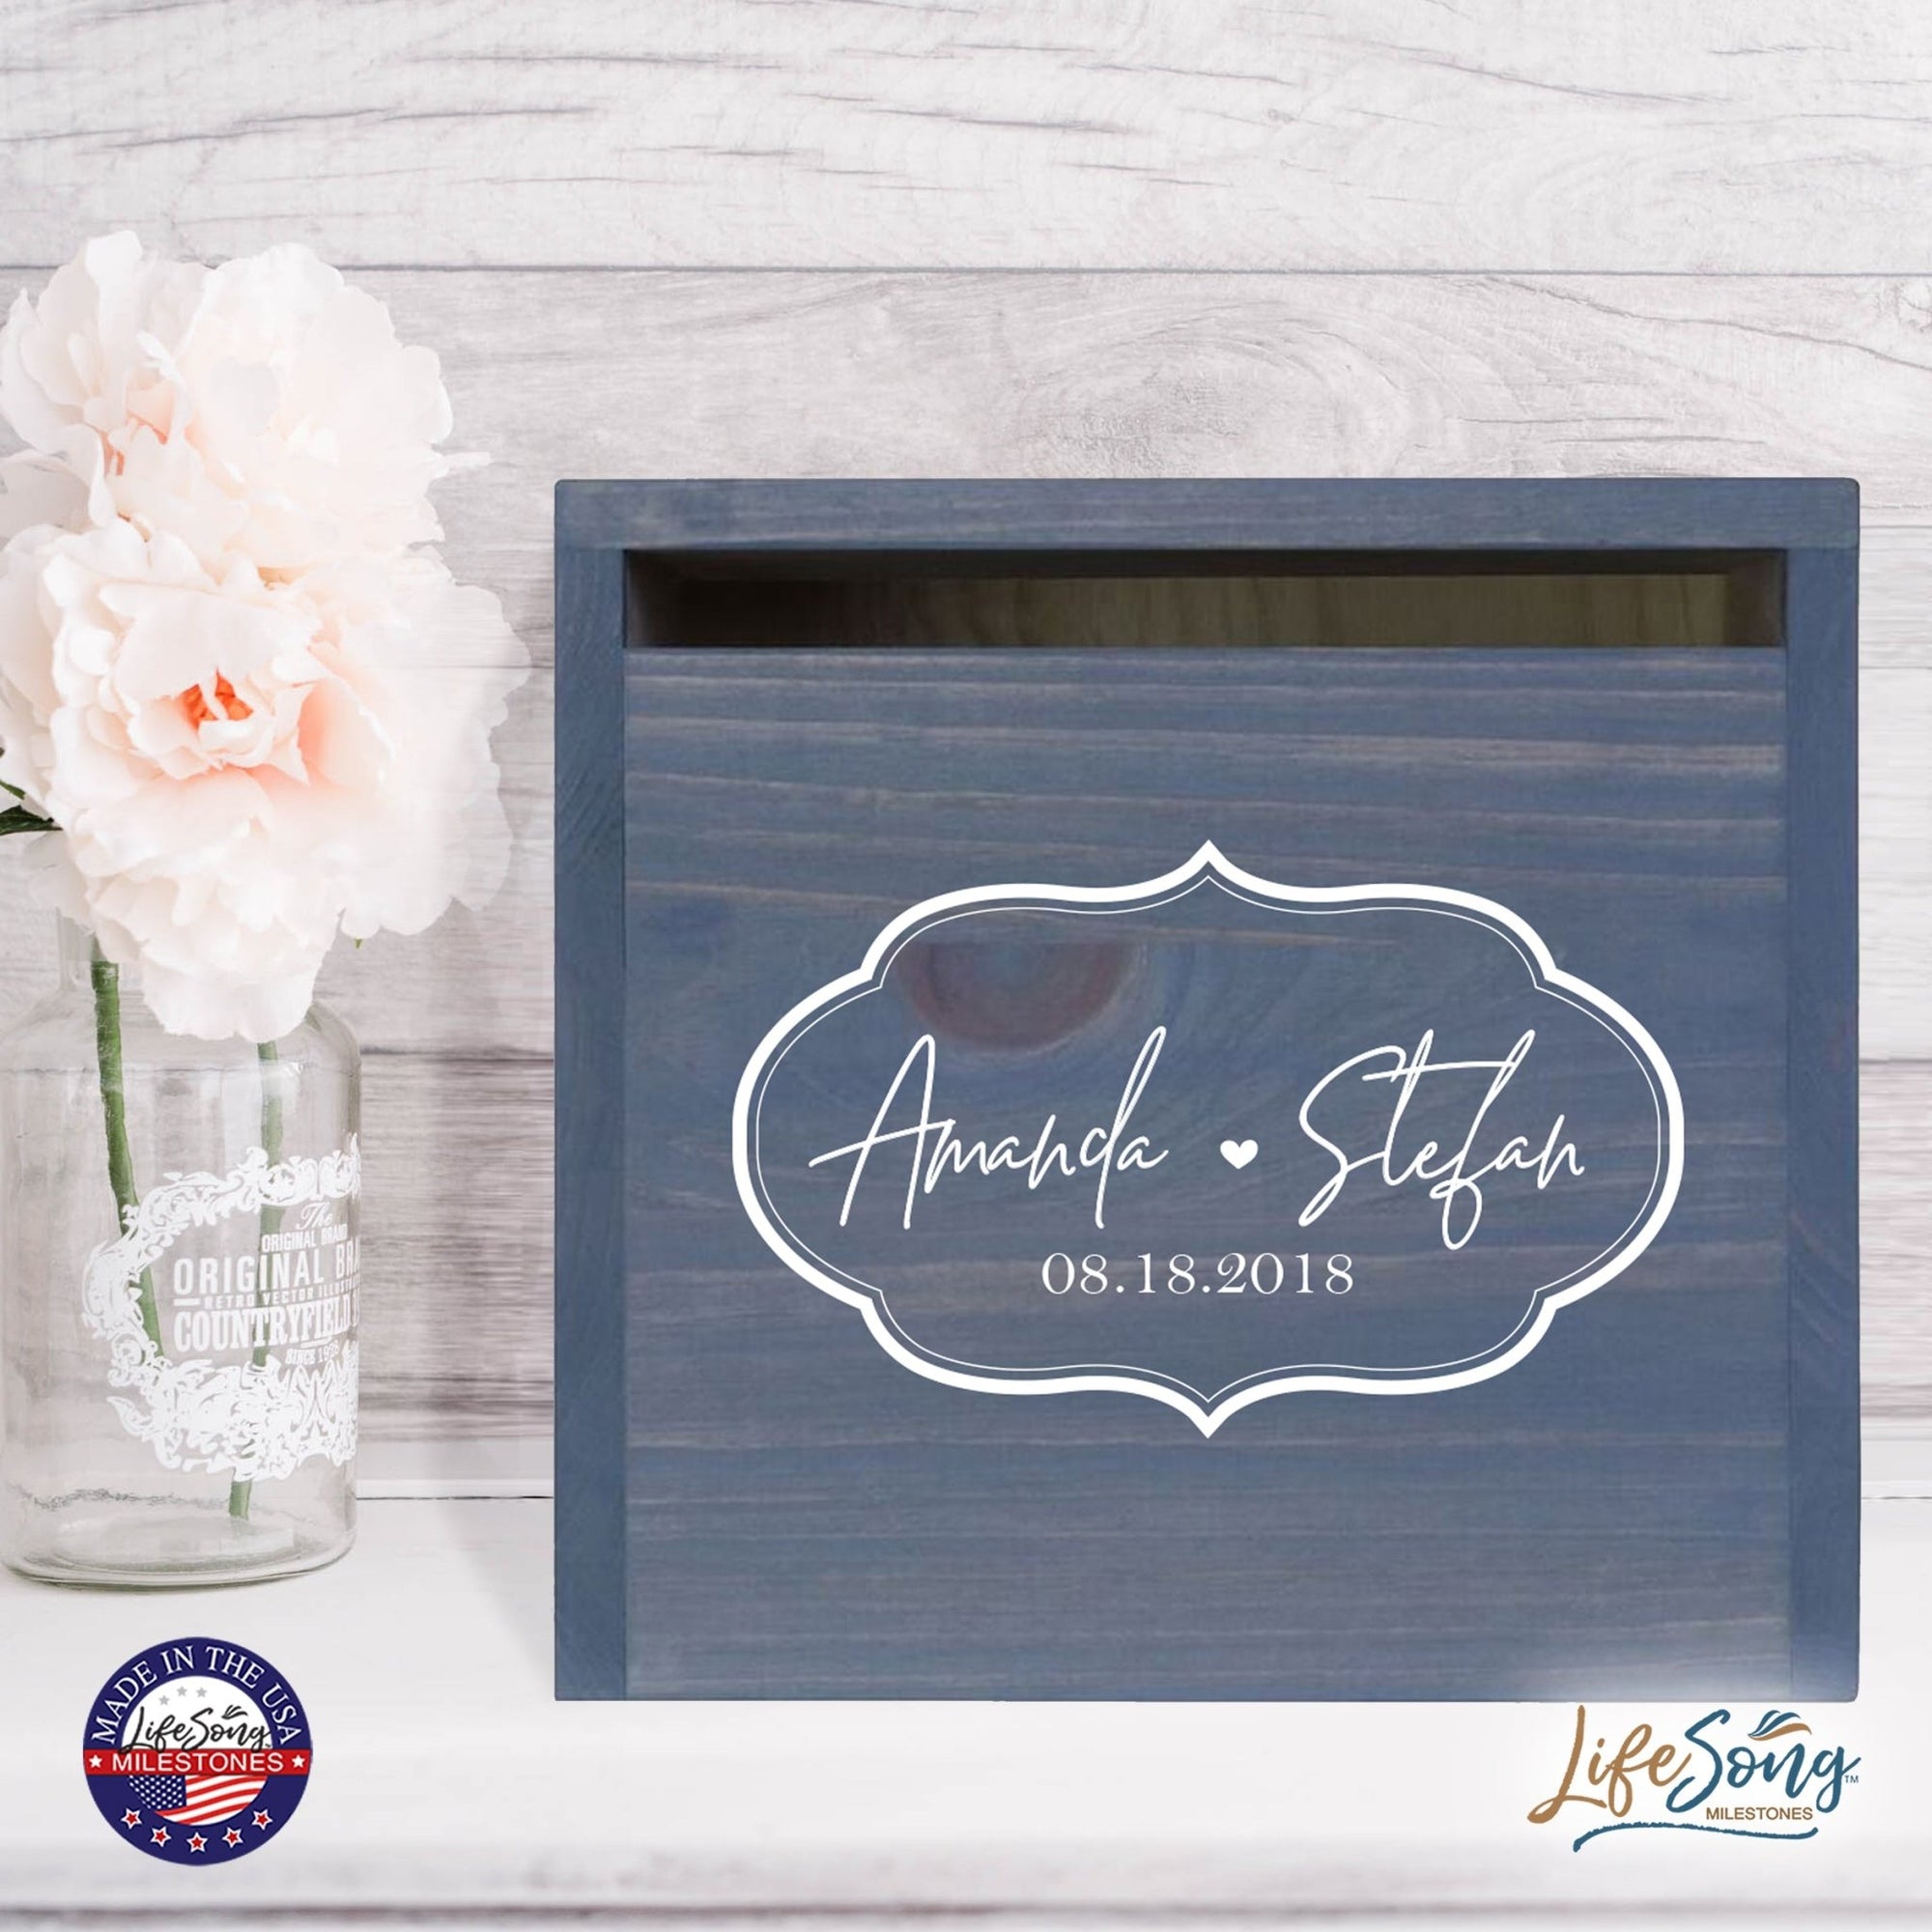 Personalized Wooden Card Box for Wedding Ceremonies, Venues, Receptions, Bridal Showers, and Engagement Parties 13.5x12 - Amanda & Stefan (Borders) - LifeSong Milestones